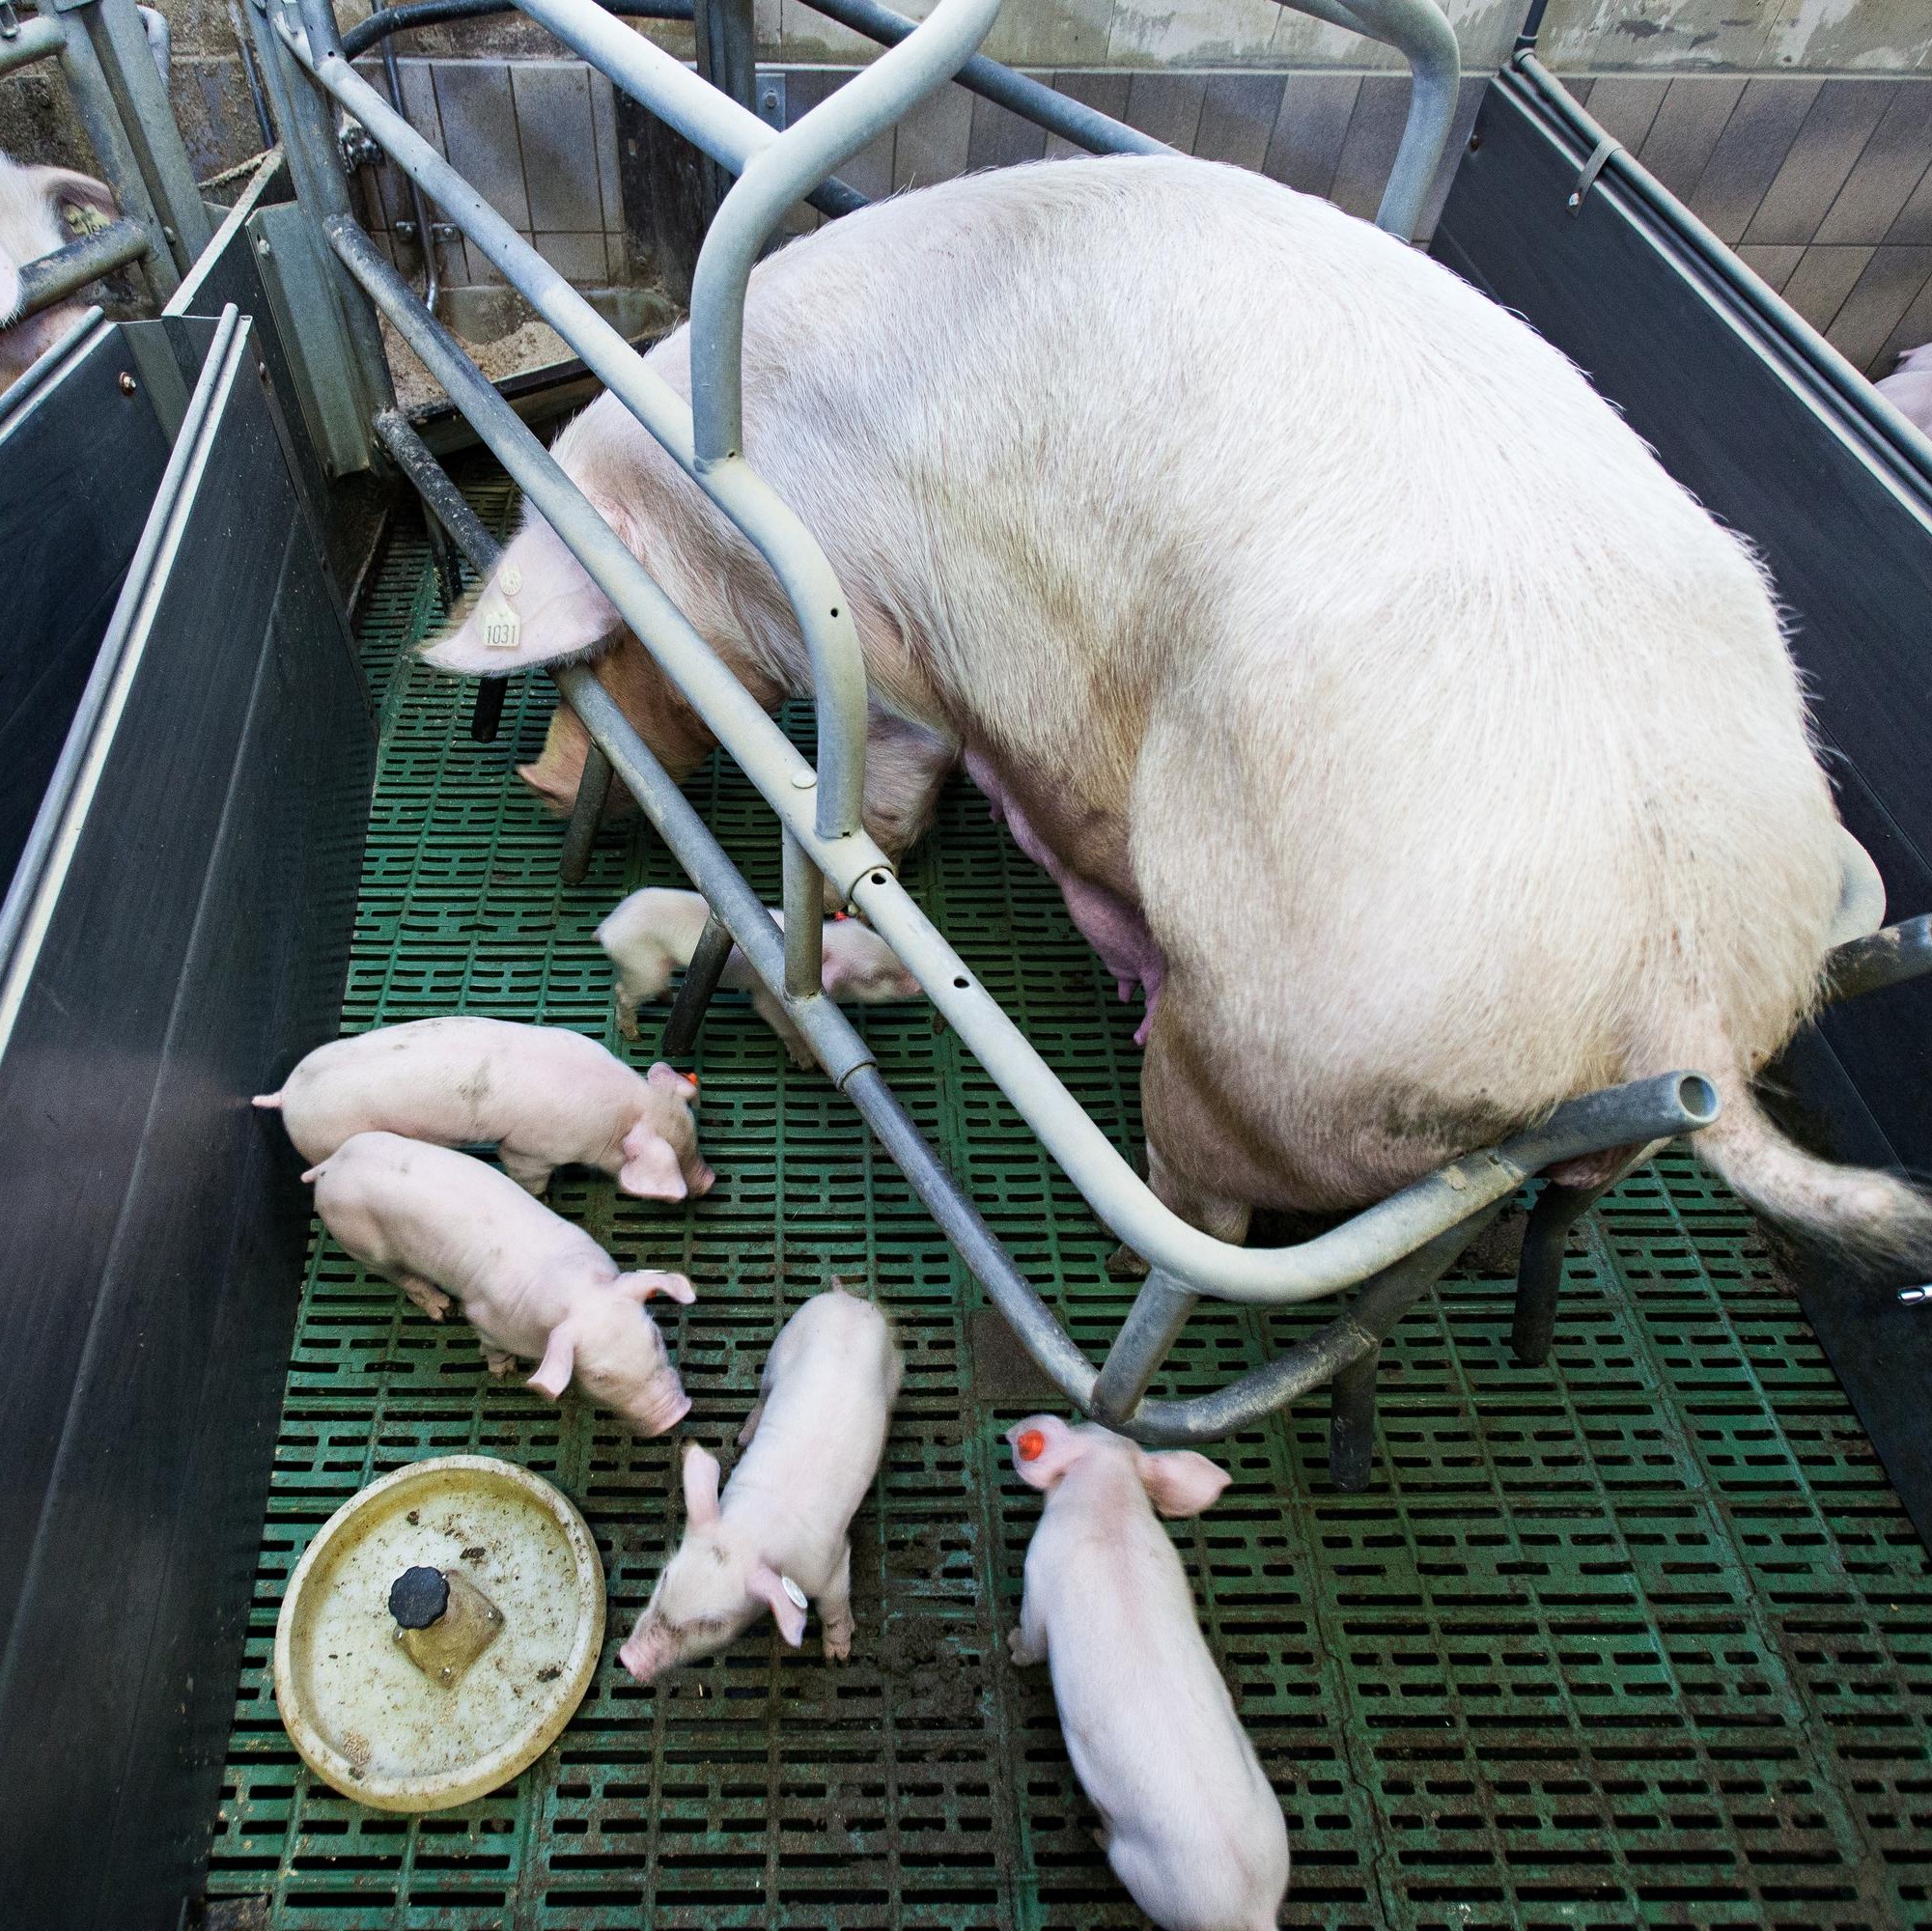 Sow fixated in her cage with her piglets